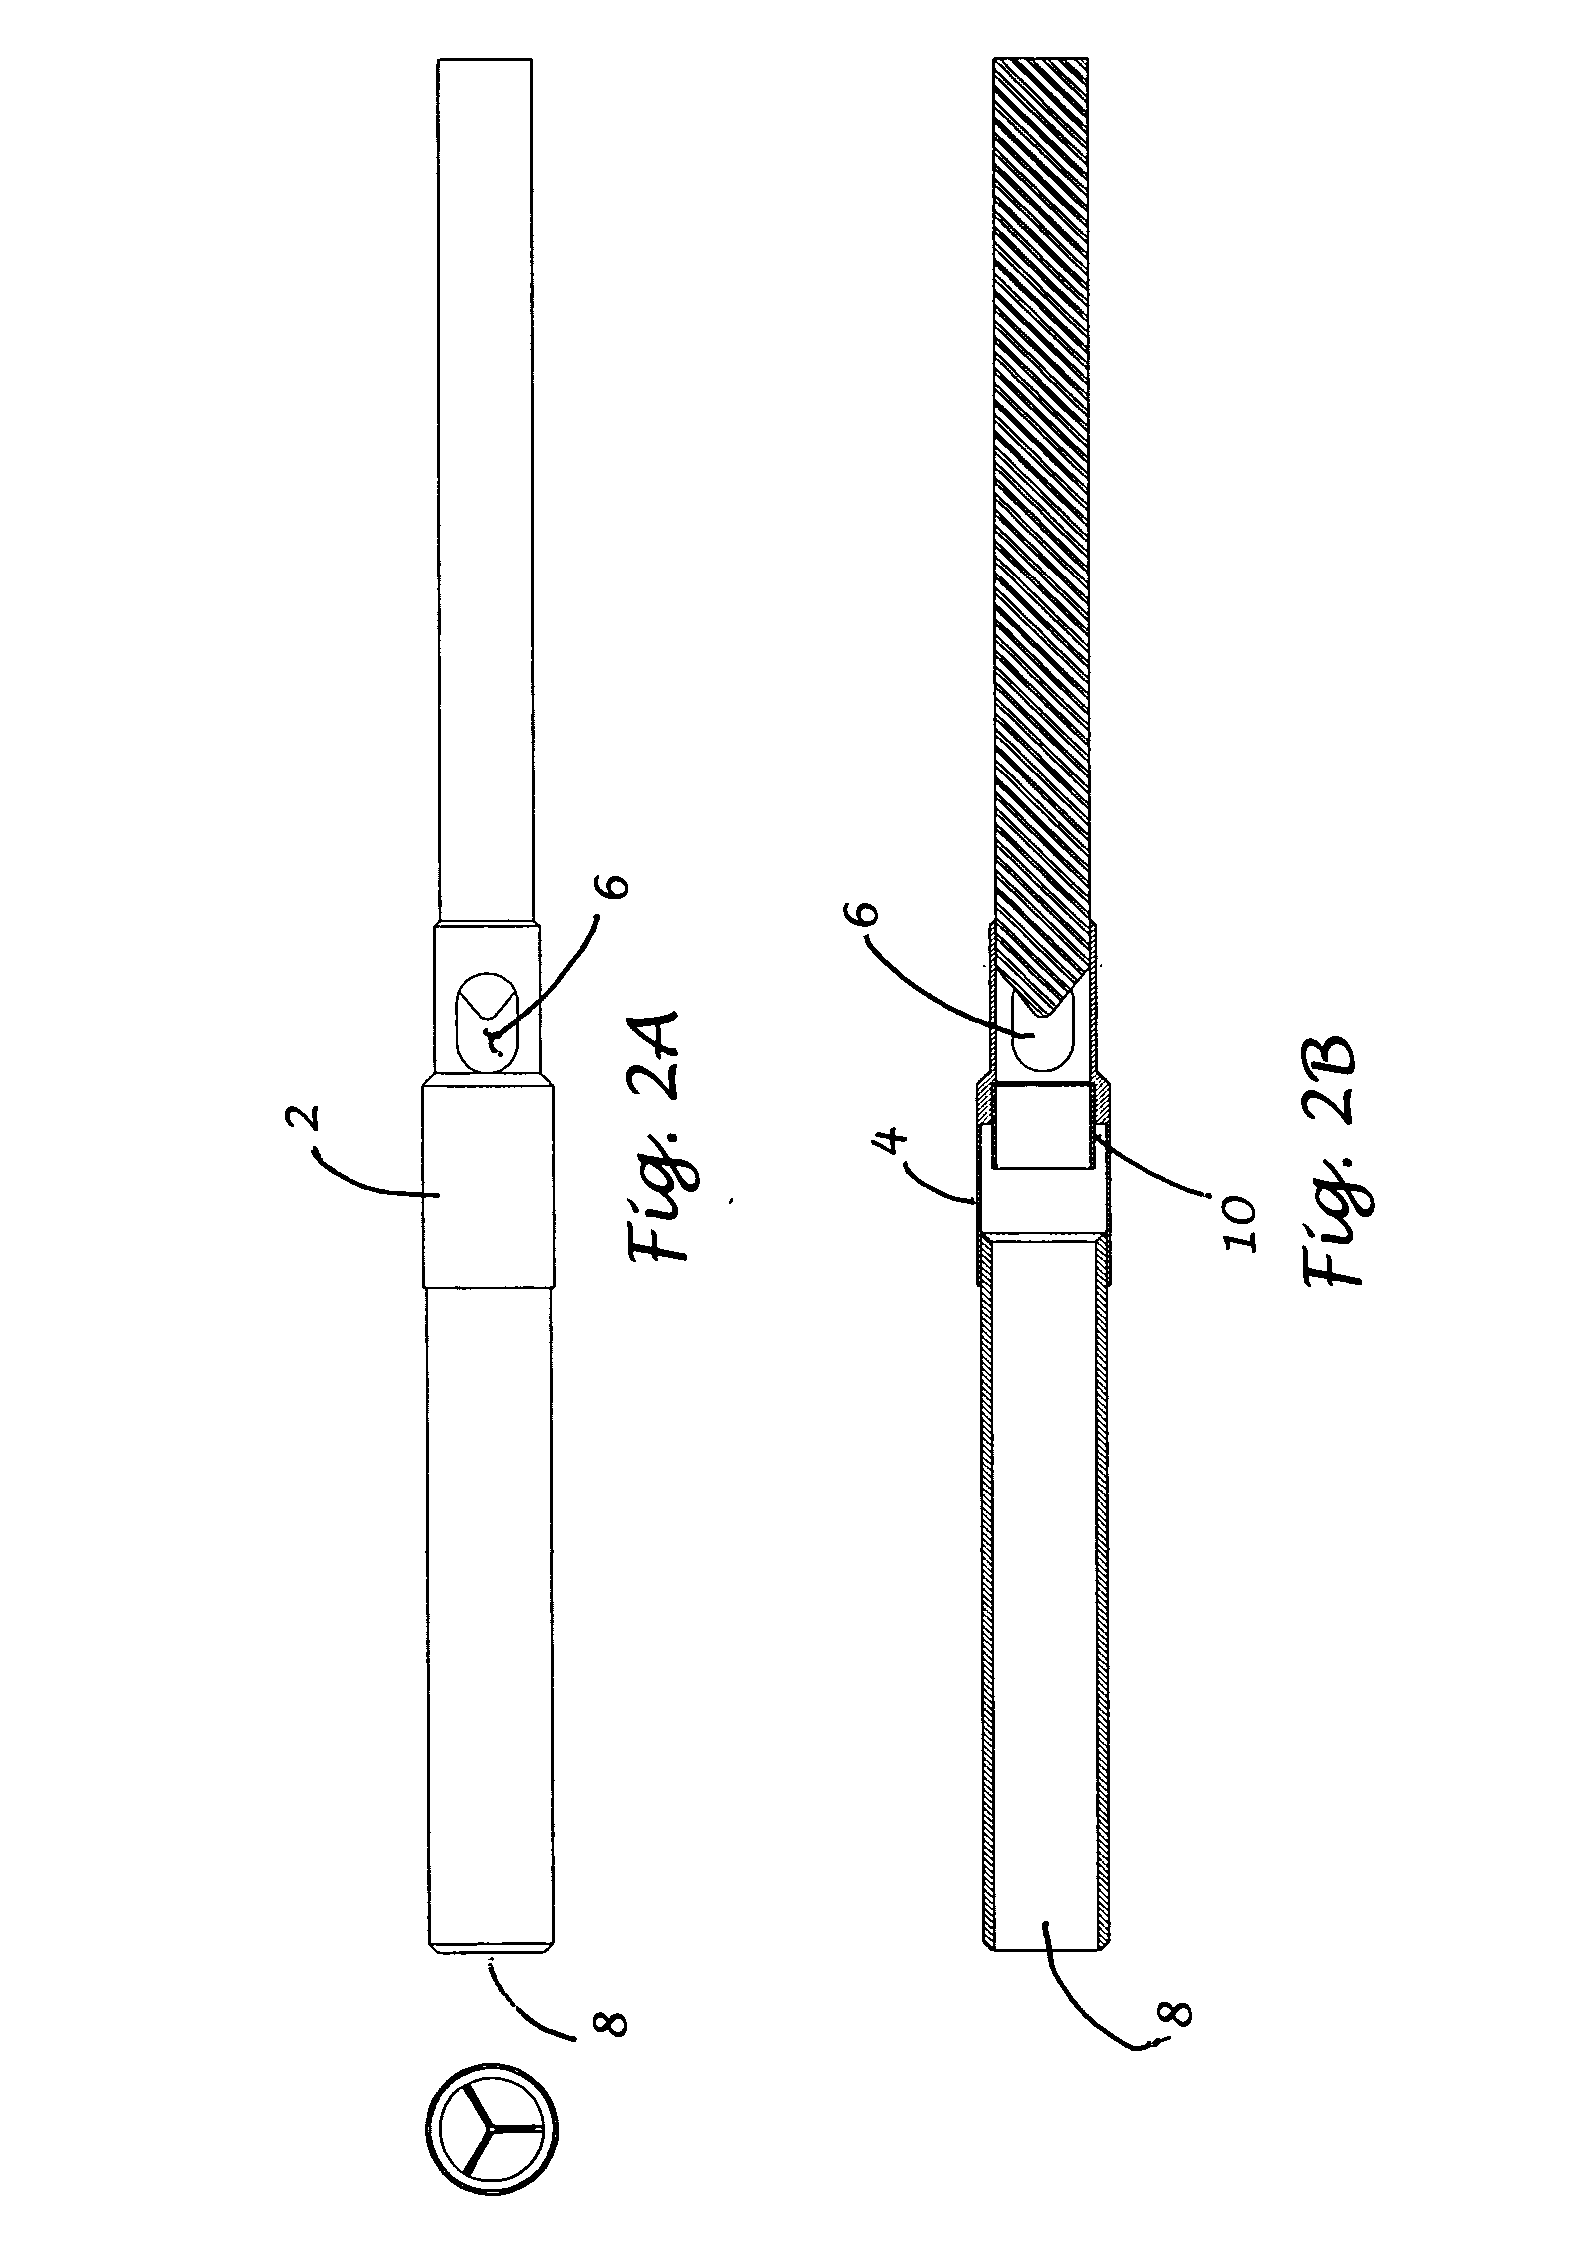 Cardiac support cannula device and method